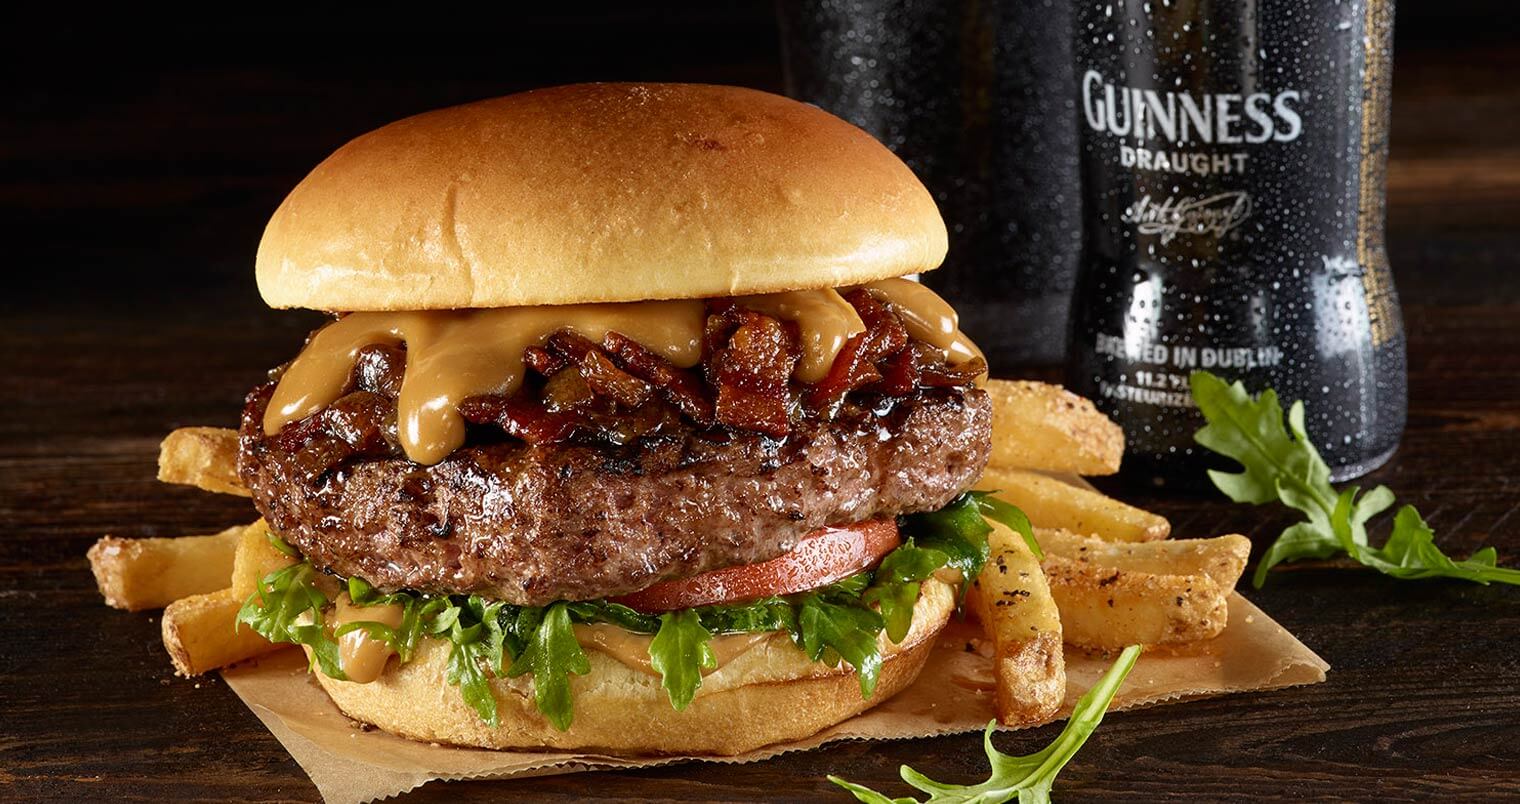 Hard Rock Introduces Guinness & Jameson Bacon Cheeseburger, Paired with Guinness Stout, industry news, featured image